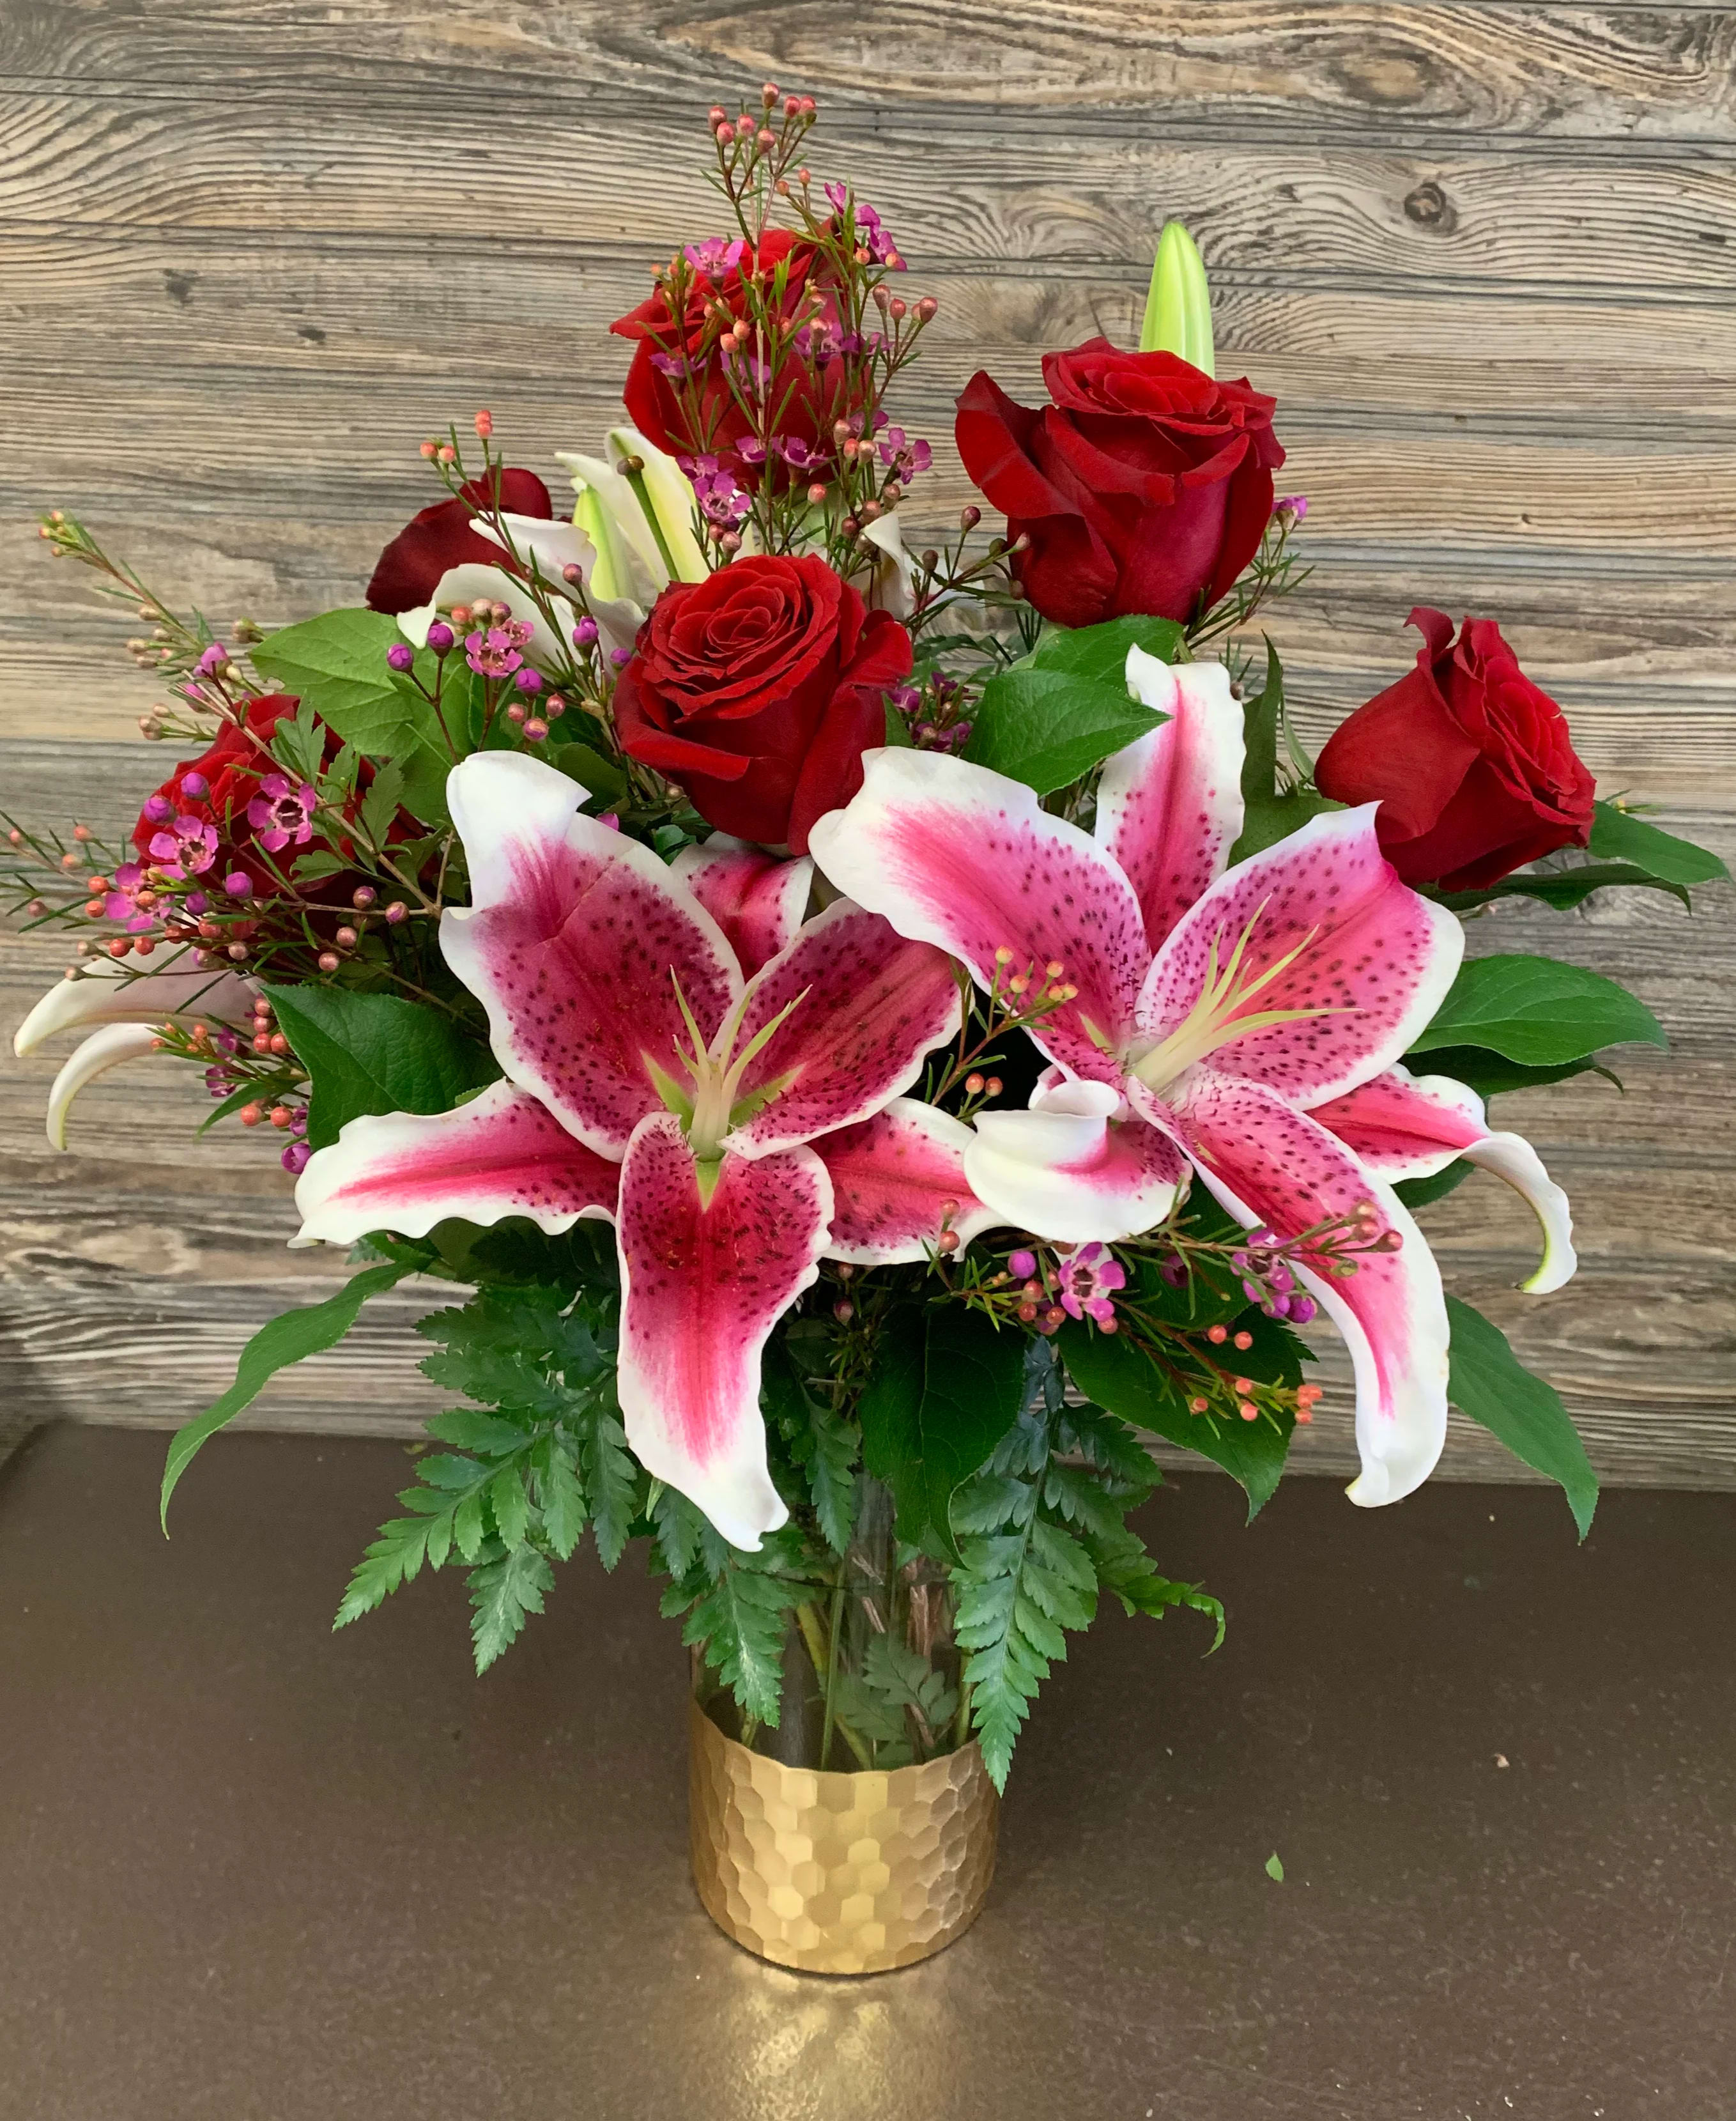 Adore You Bouquet  - Adore You Bouquet is a mixture of Pink Oriental Lilies and Red roses accented with greenery and wax flower in an really nice Accent Décor 9 inch clear glass Honeycombed bottom vase!  The vase is definitely a vase you will use again and again!  The arrangement designed is about 18hx 14w. 